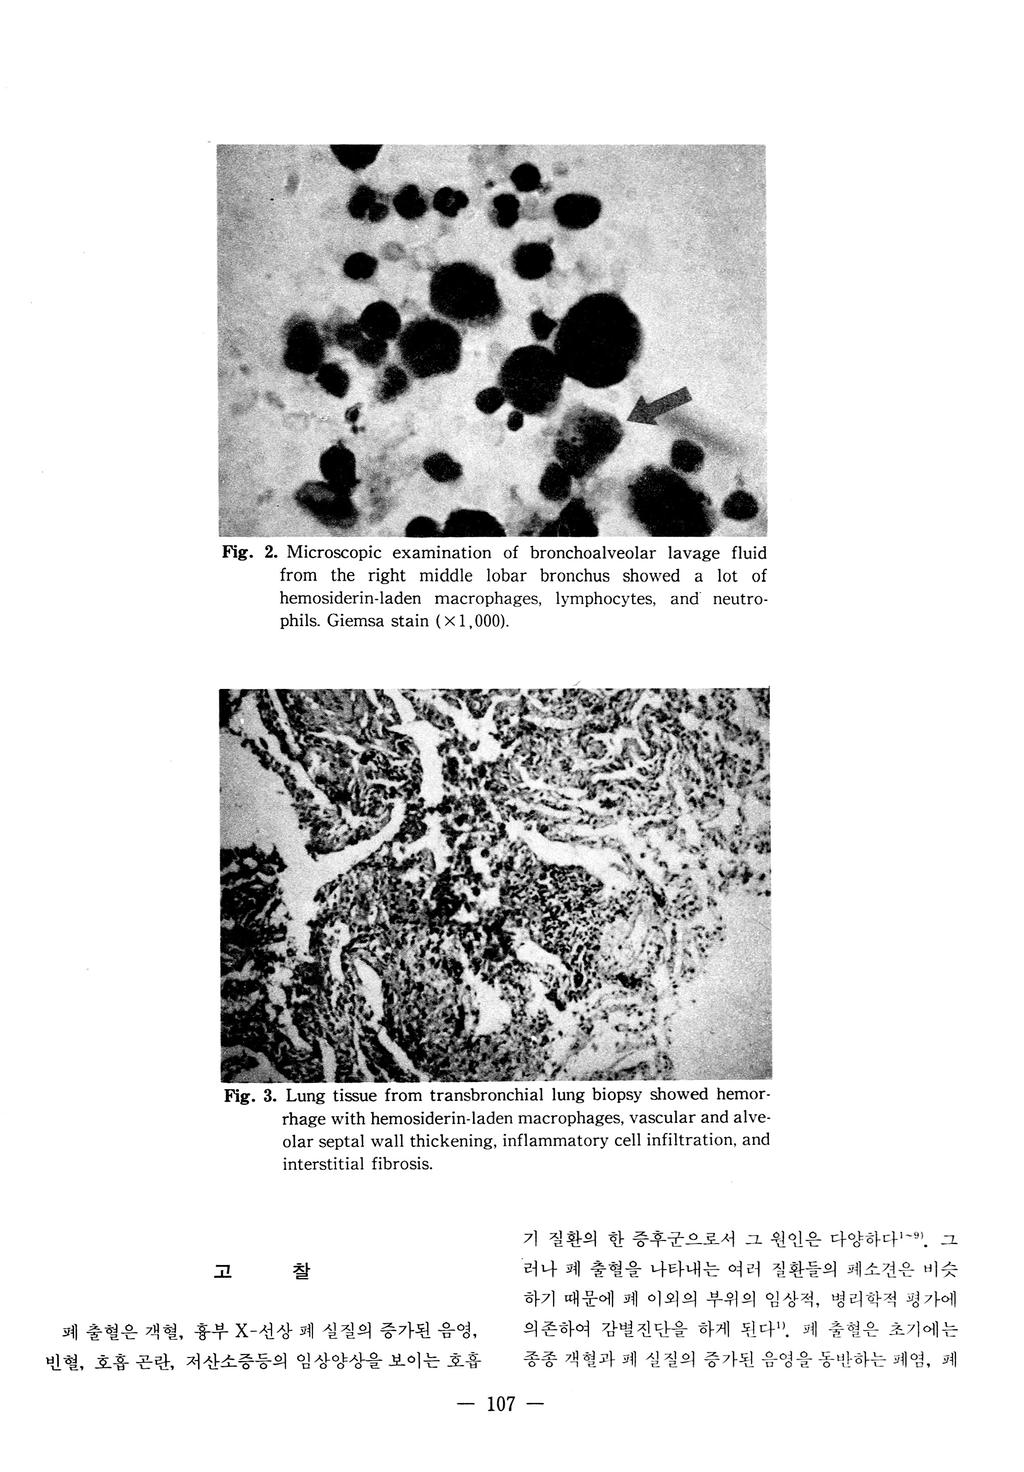 Fig. 2. Microscopic examination of bronchoalveolar lavage fluid from the right middle lobar bronchus showed a lot of hemosiderin-laden macrophages, lymphocytes, and' neutrophils.